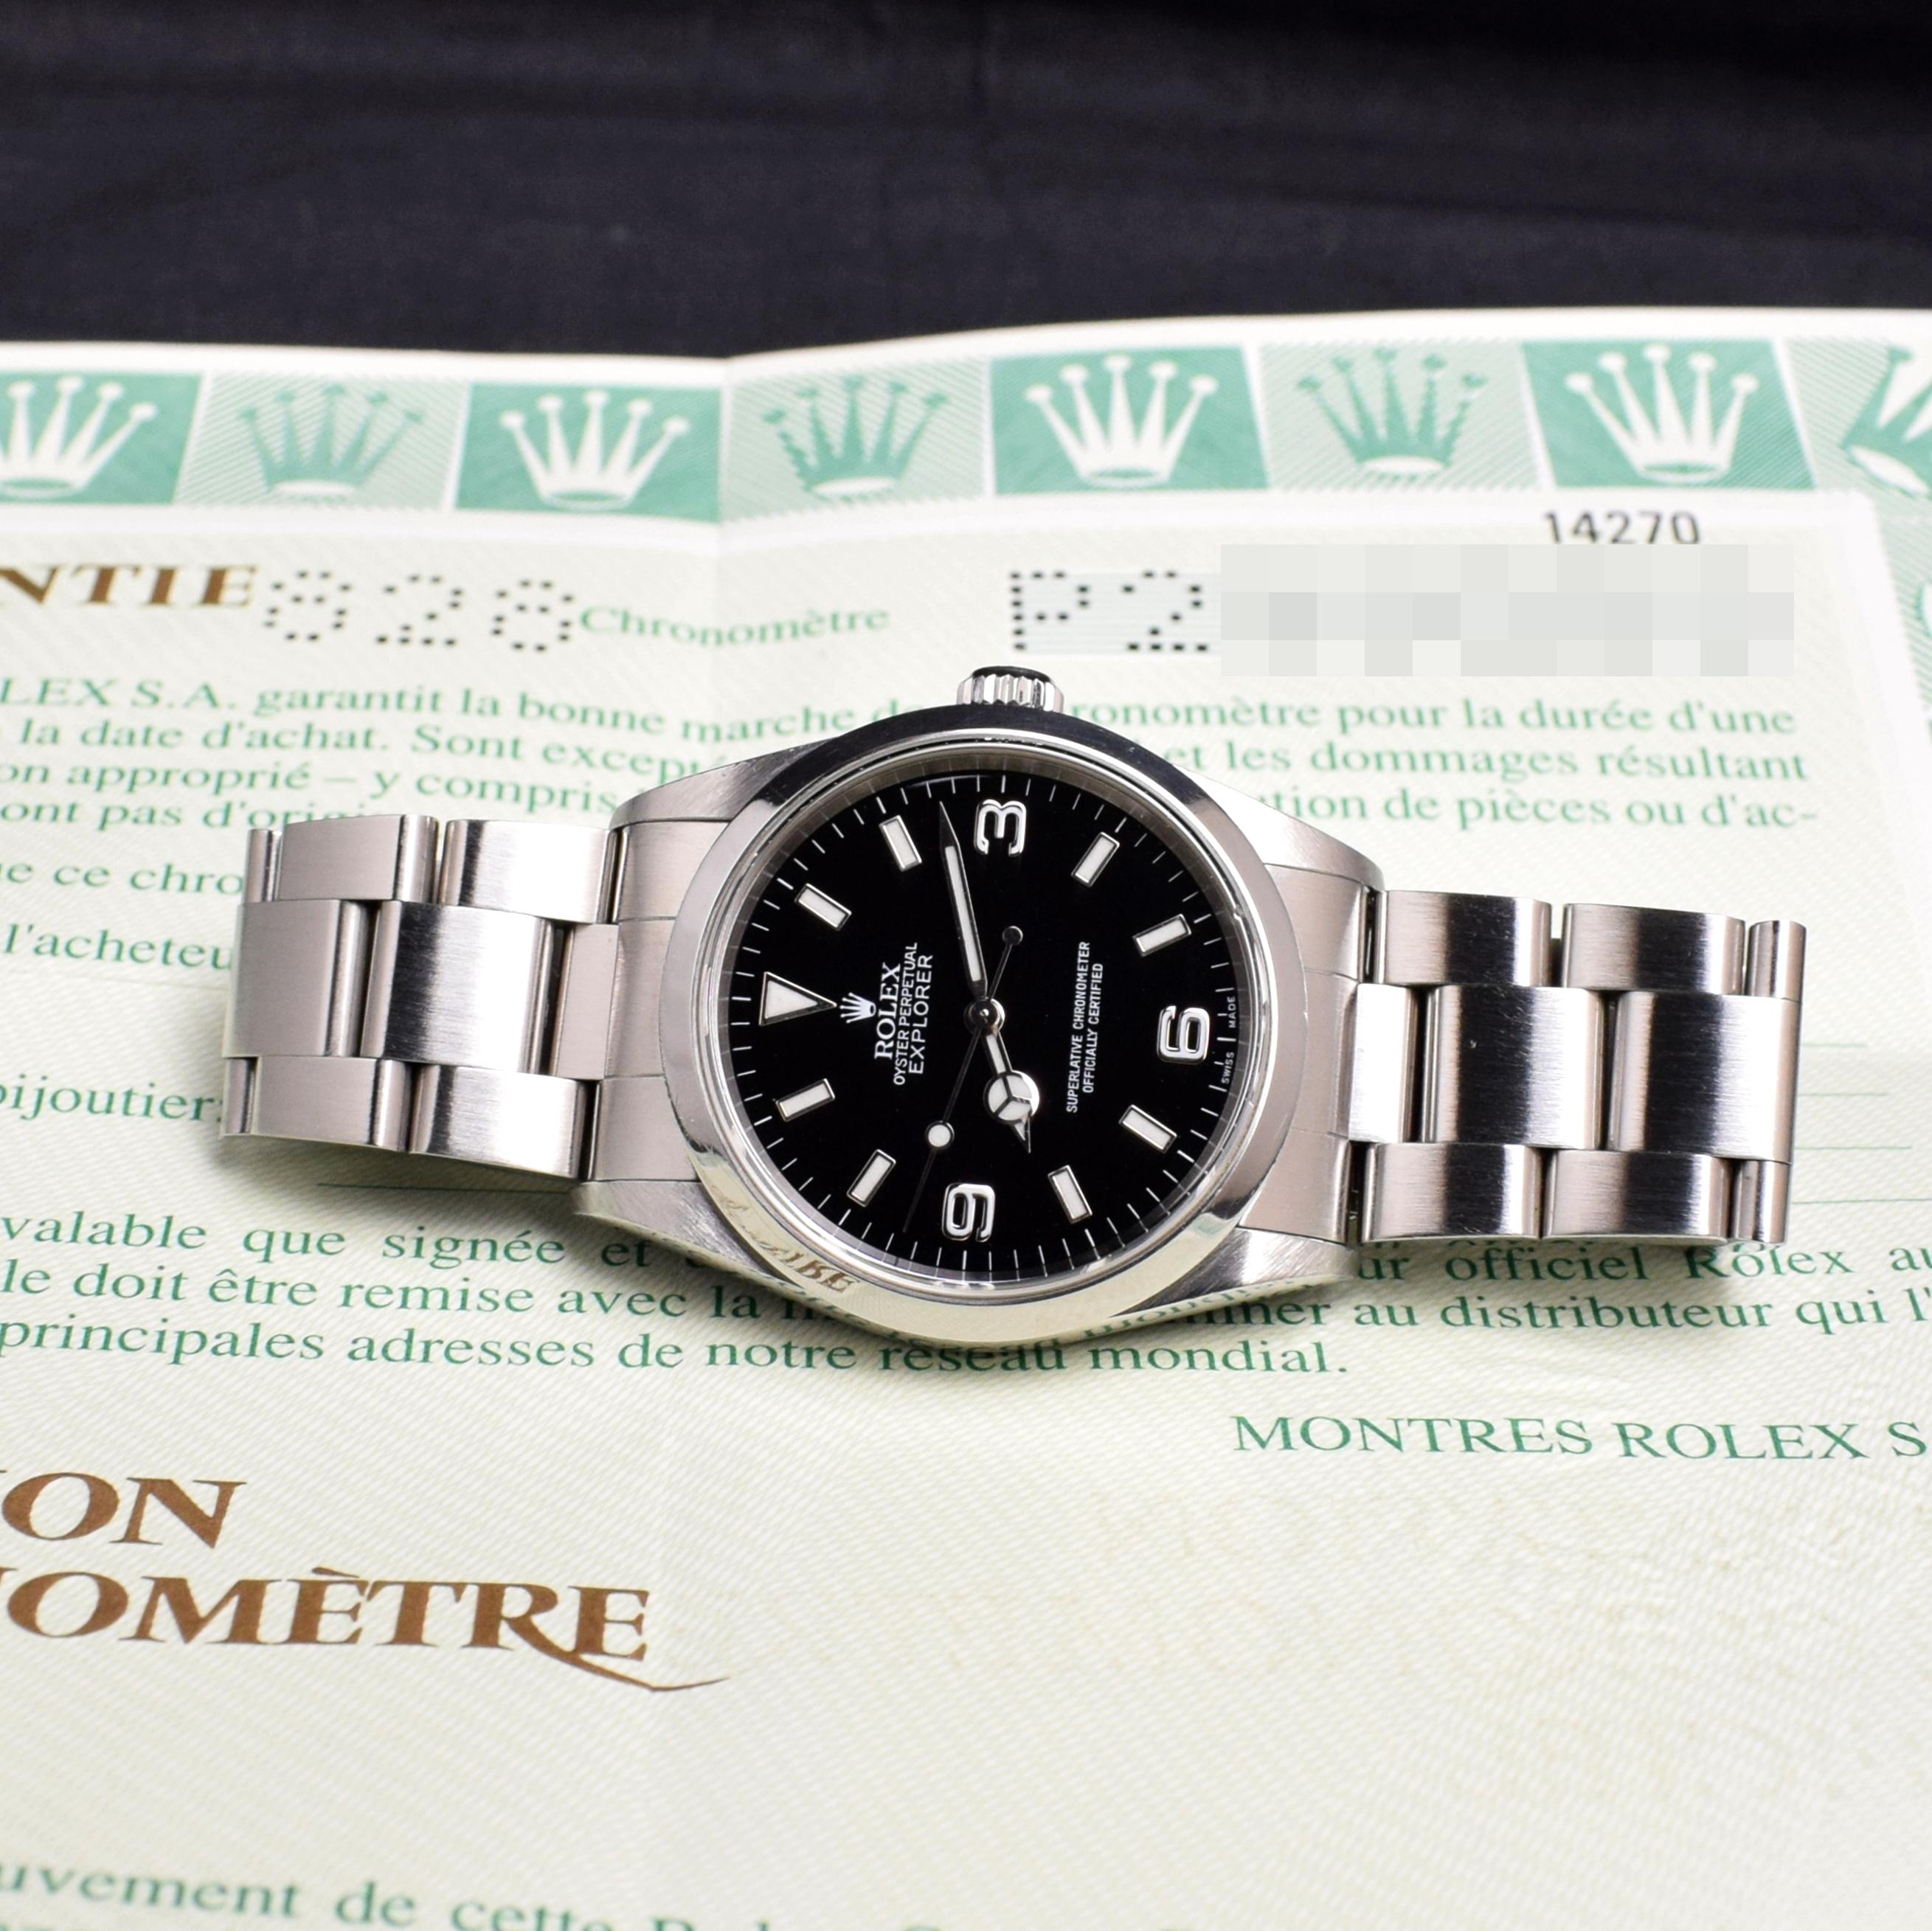 Brand: Rolex
Model: 14270
Year: 2000
Serial number: P2xxxxx
Reference: C03460
Case: Shows sign of wear with slight polish from previous; inner case back stamped 2080
Dial: Excellent Condition black “Swiss” dial w/ matching hands
Bracelet: 78790